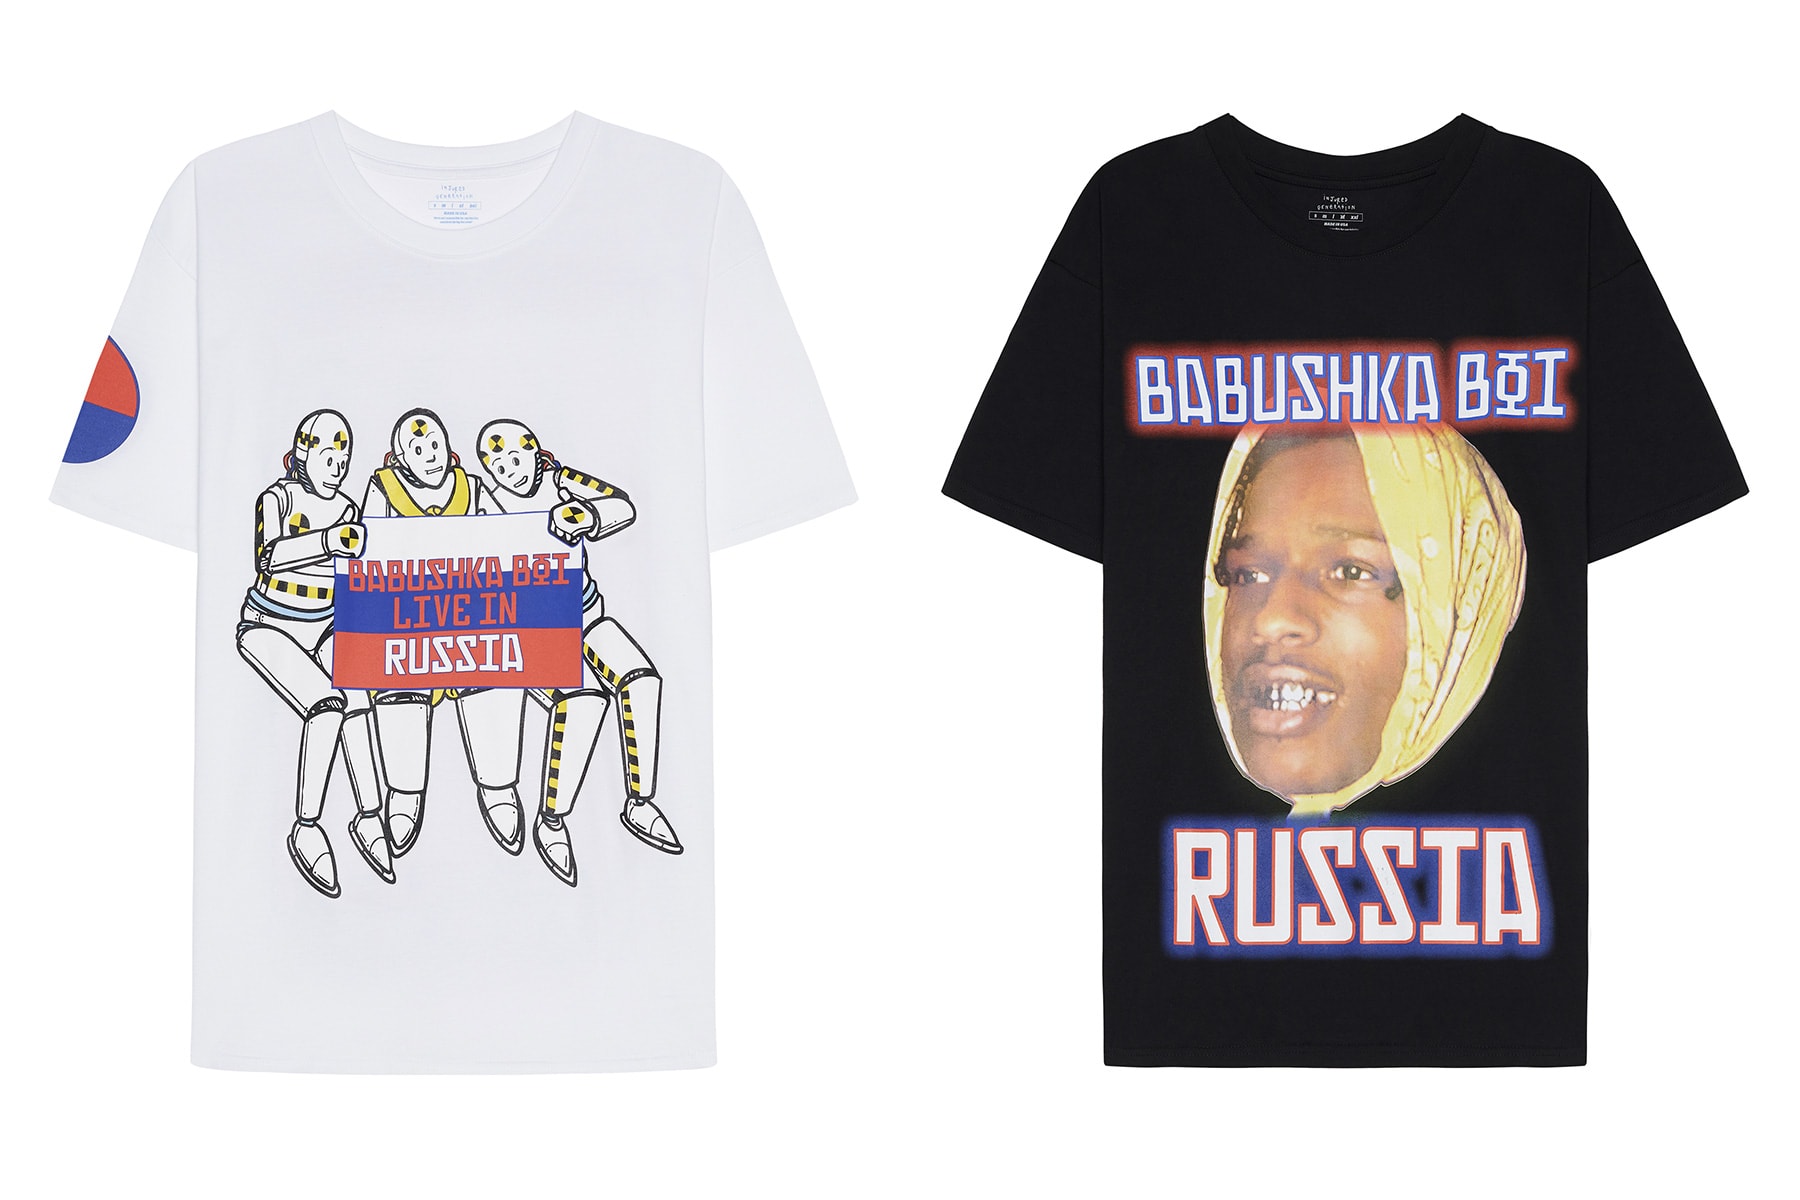 A$AP Rocky Limited Edition Russia Tour Merchandise SVMOSCOW Babushka Boi AWGE designed prints t-shirts long sleeves shorts hat drop date release info price pictures 